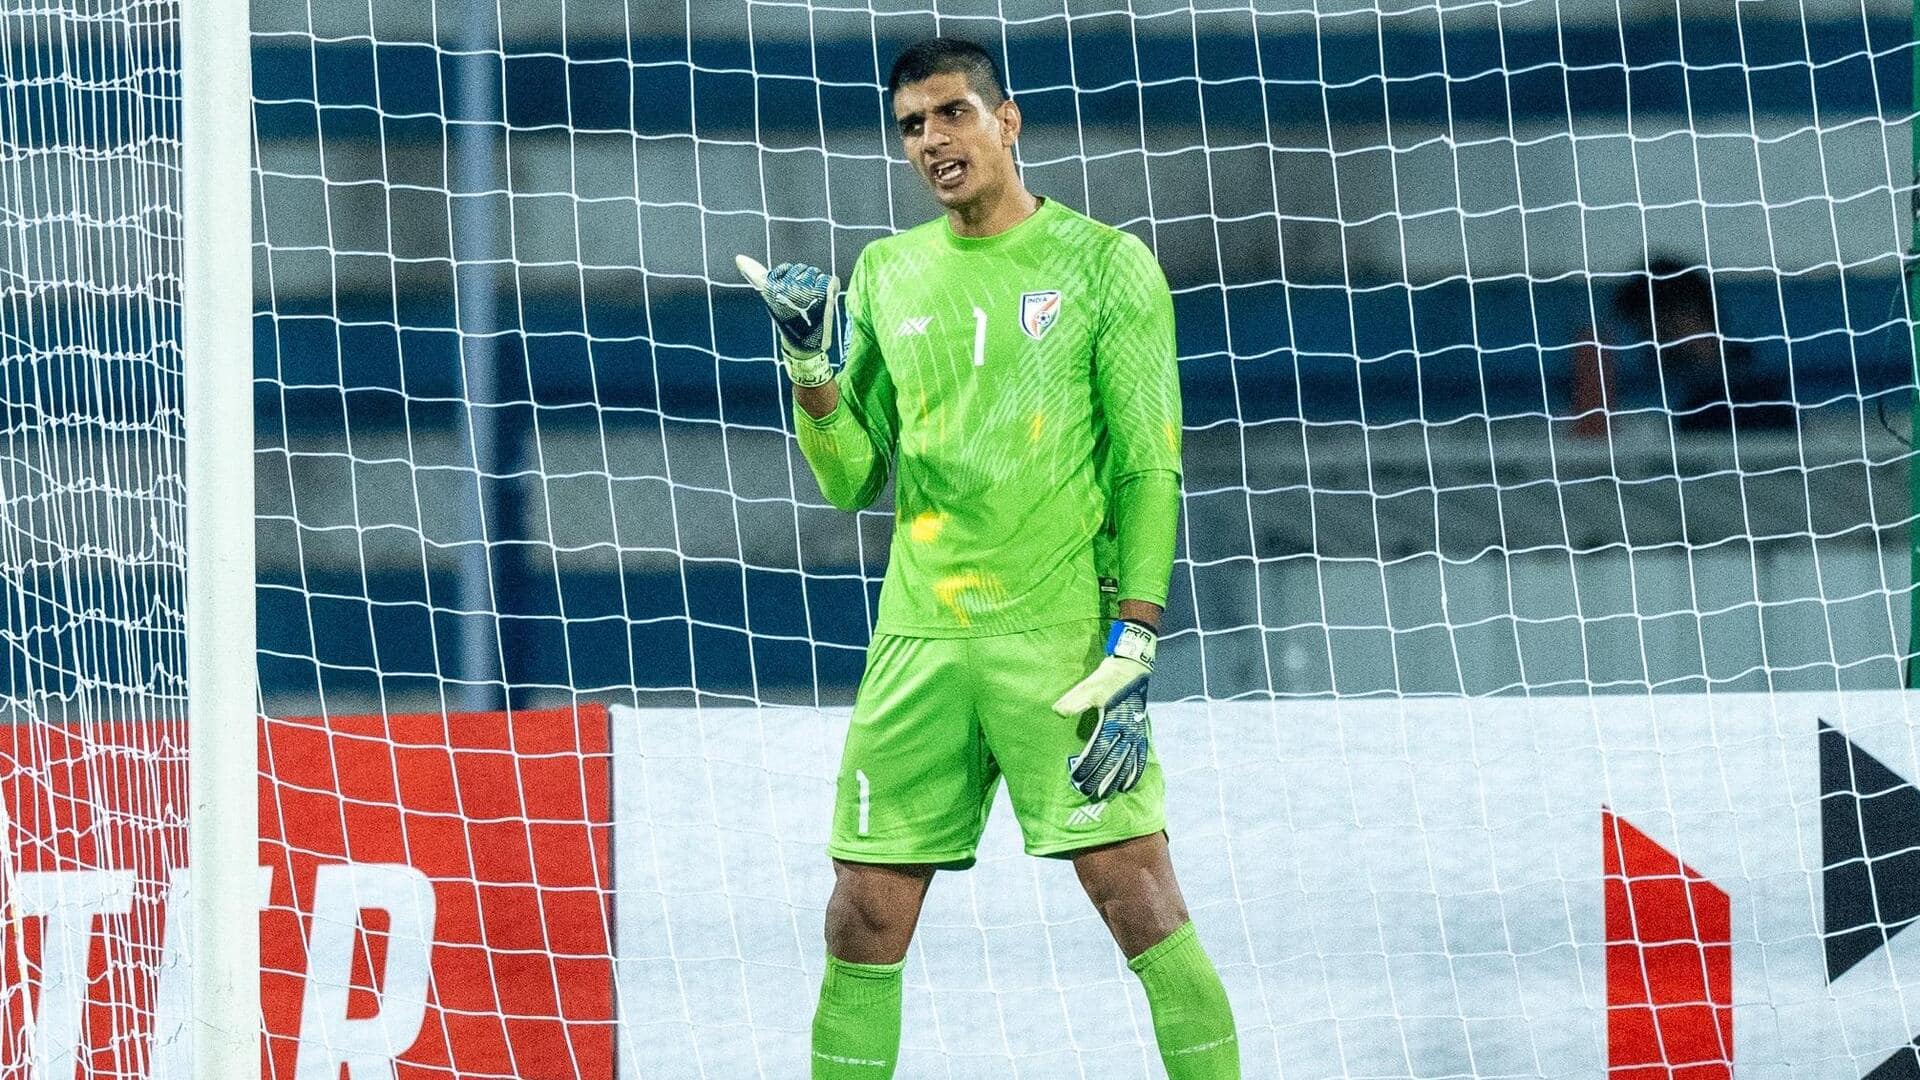 Gurpreet Singh Sandhu owns most clean sheets for India: Stats